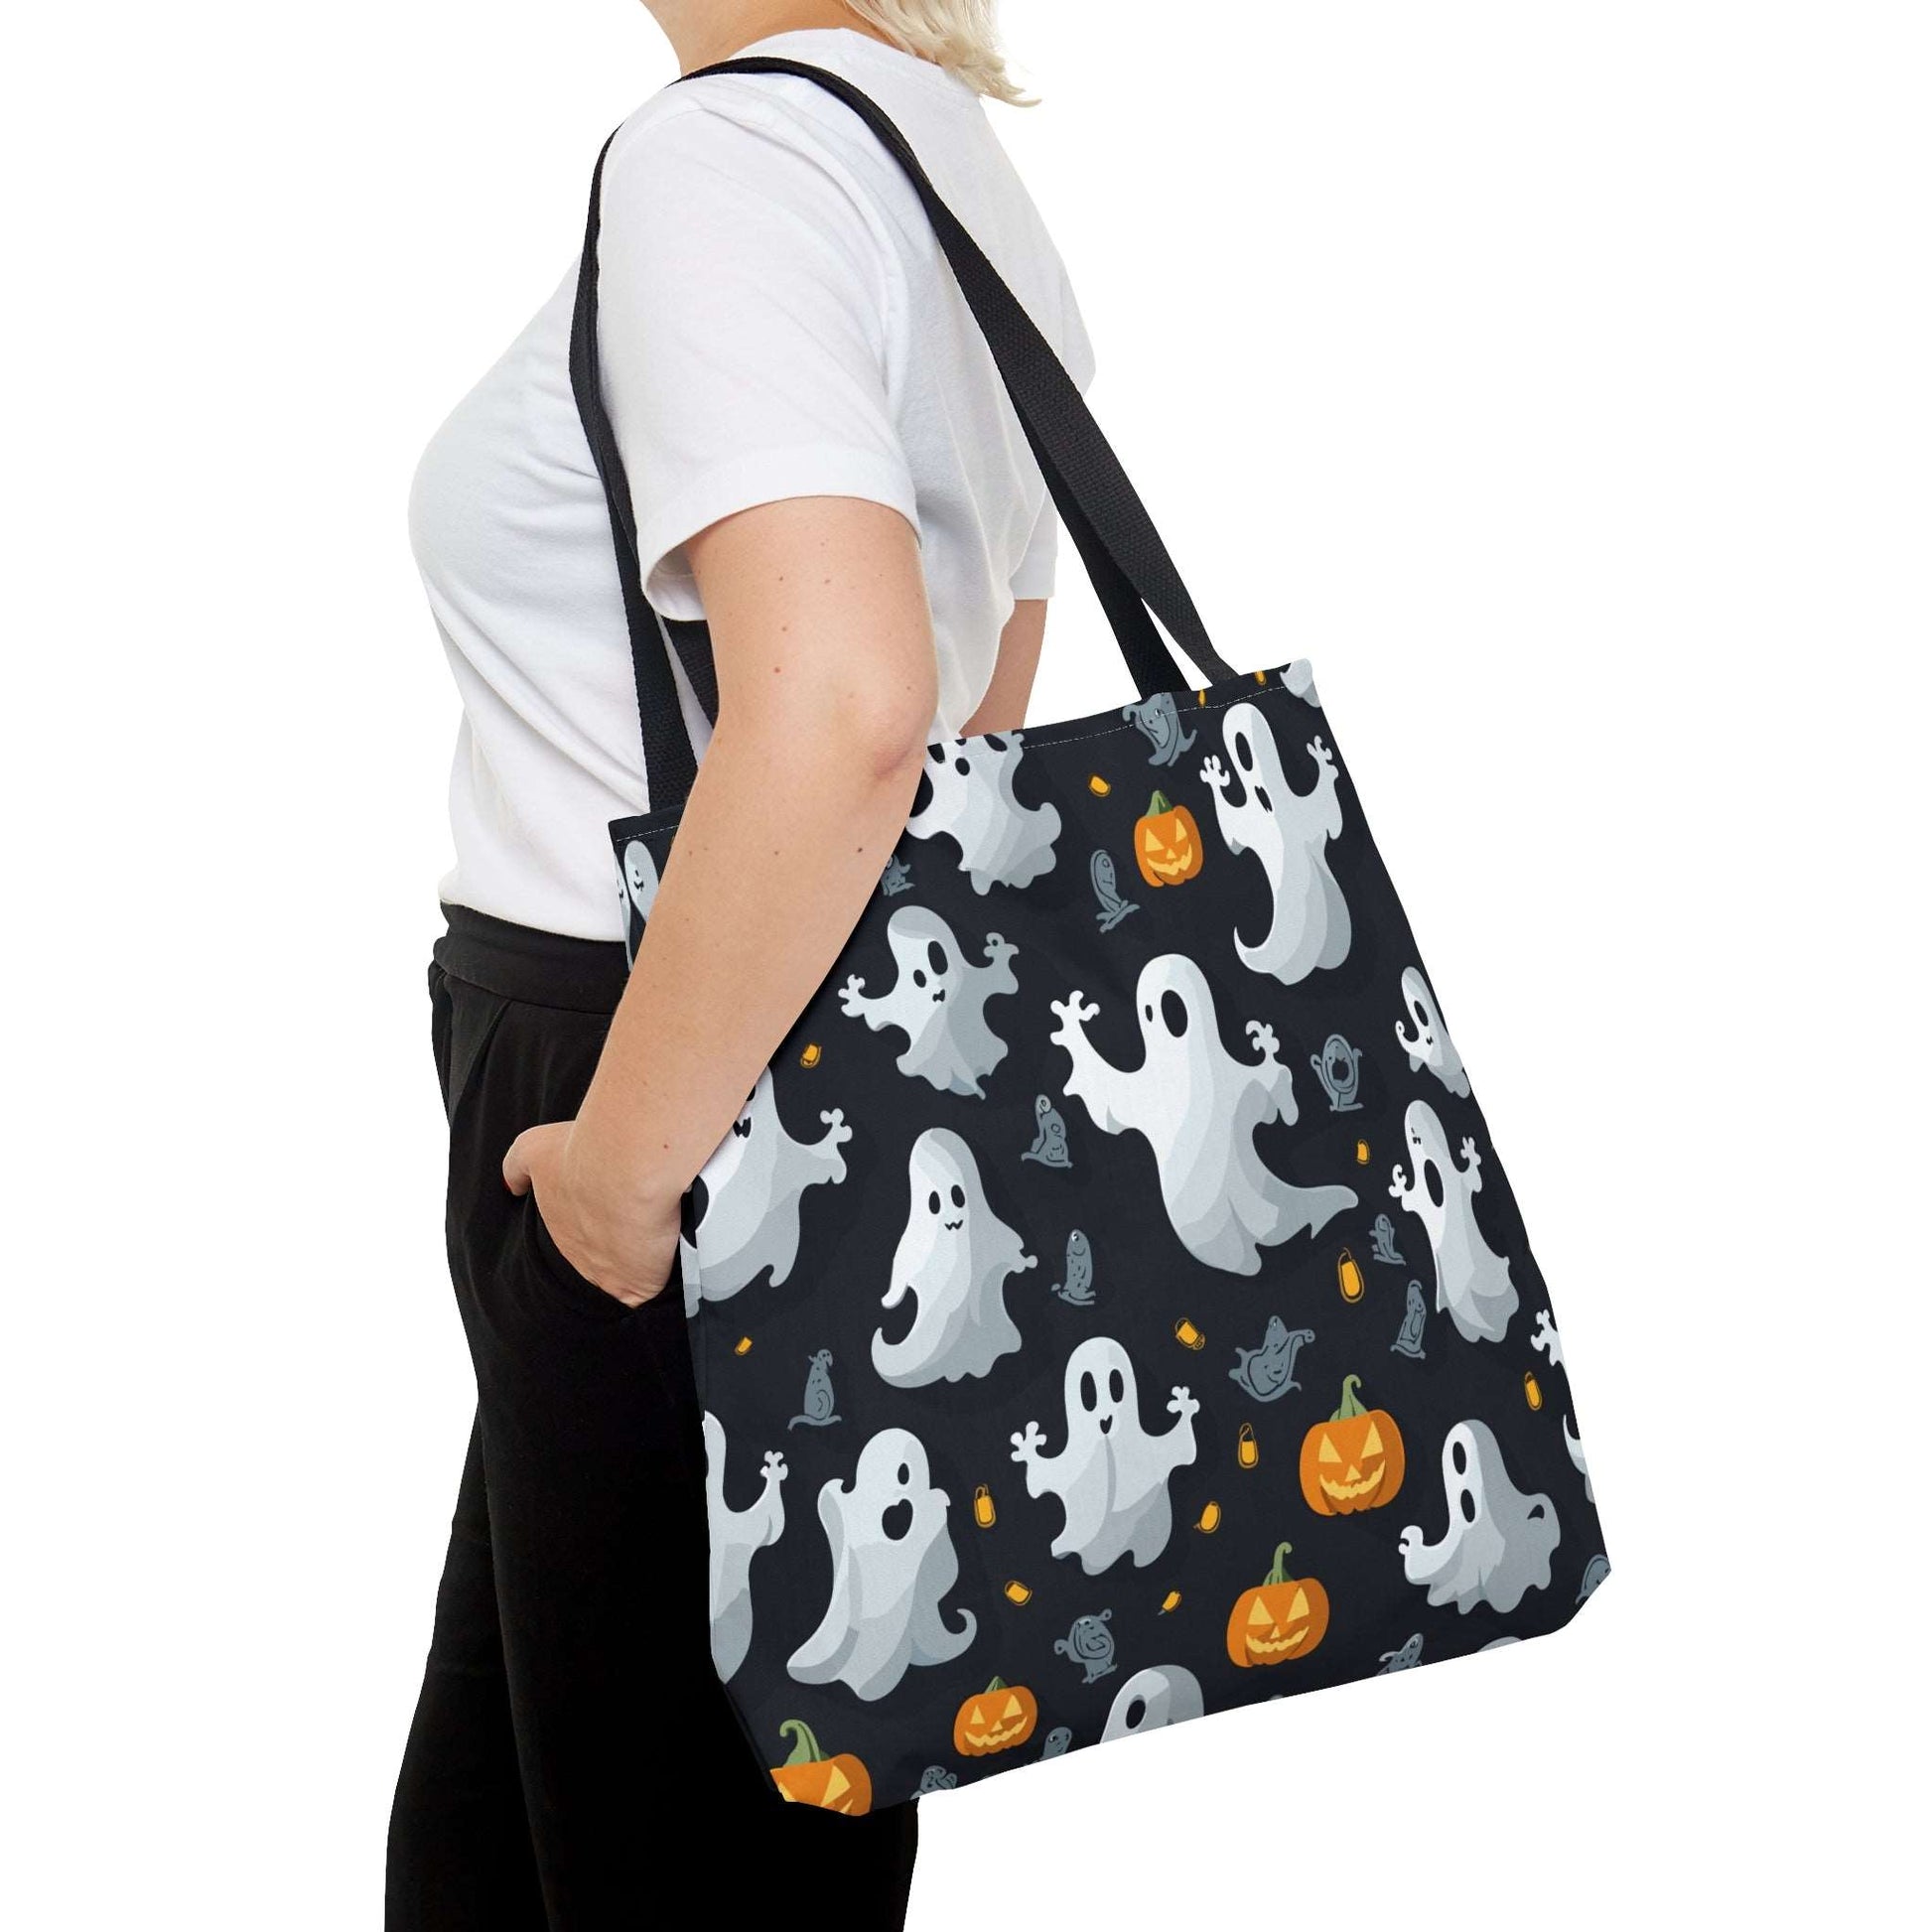 Ghost Tote Bag from Fierce Fusion